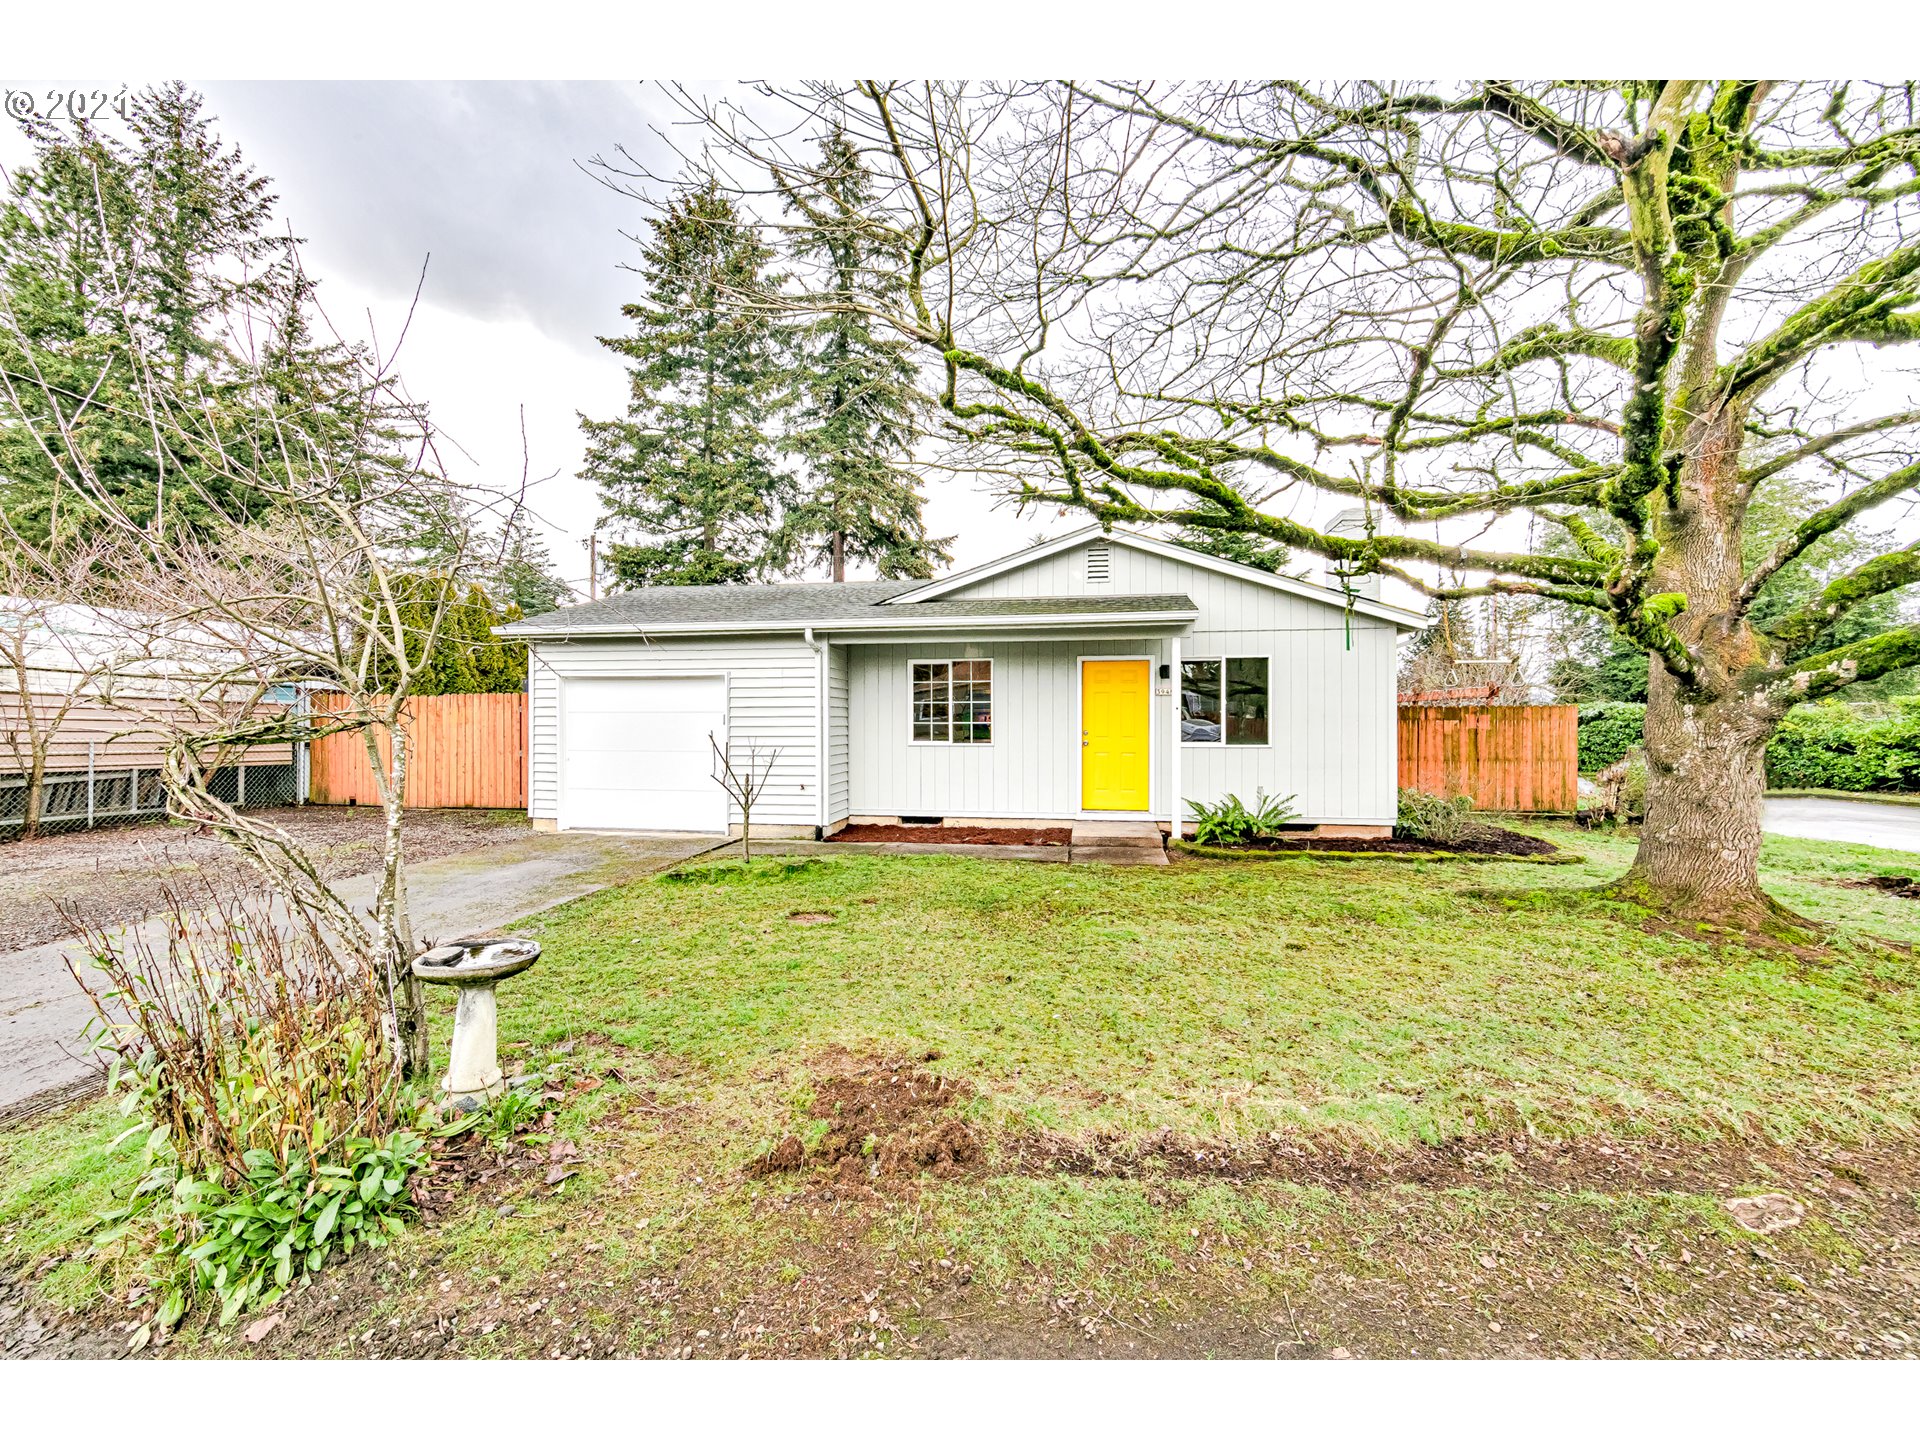 3948 SE 104TH AVE (1 of 22)